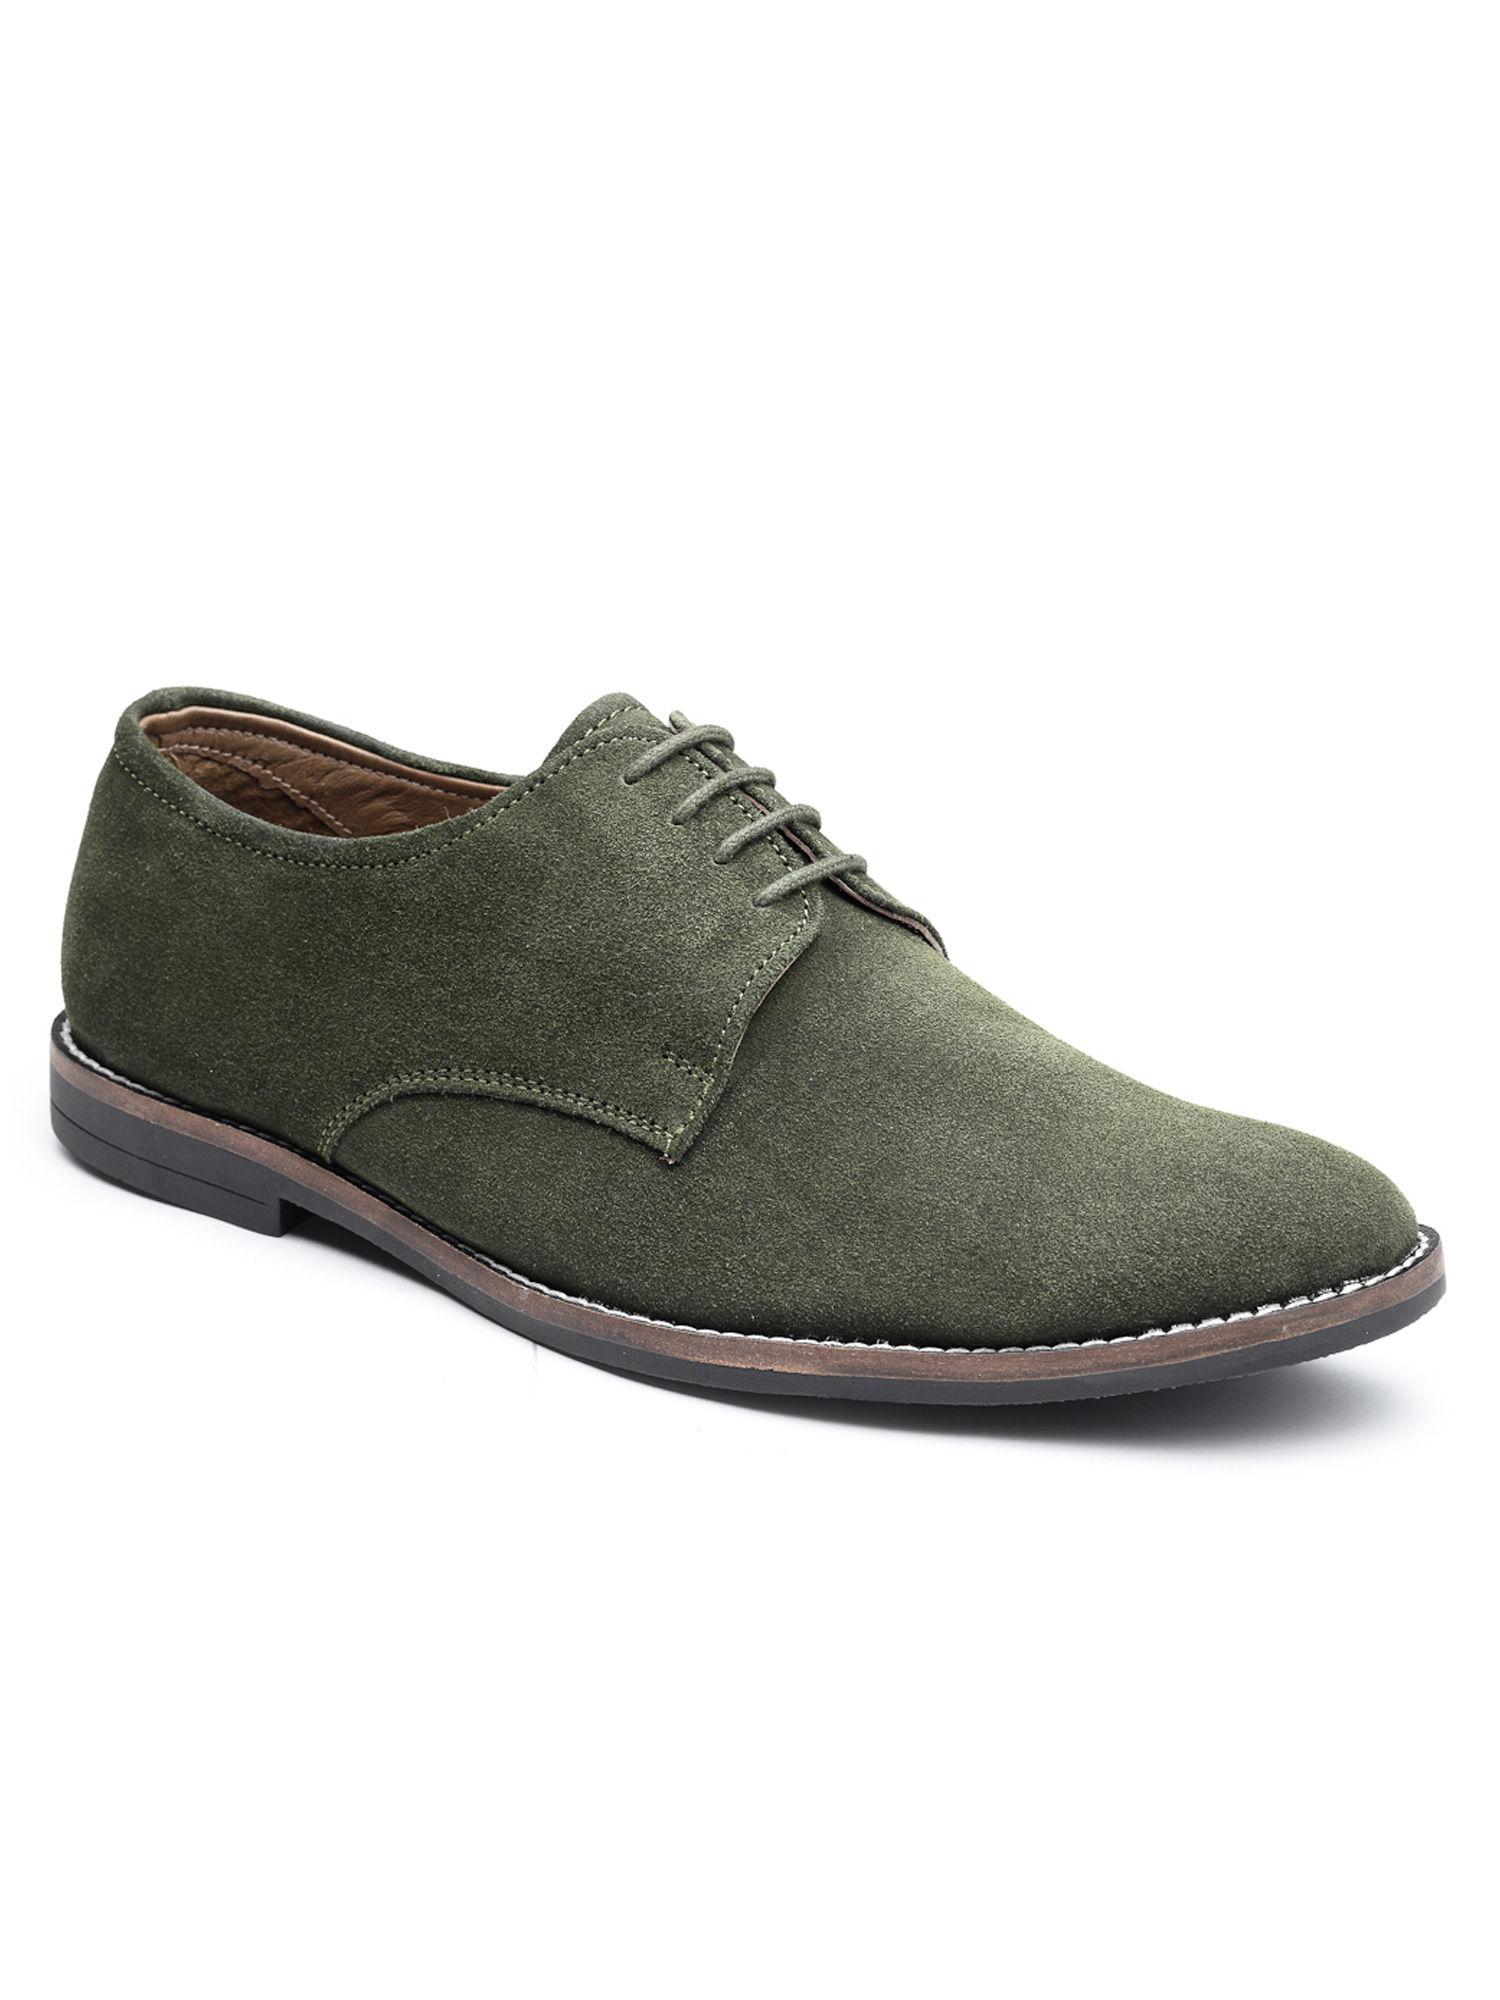 solid green italian suede leather derbies